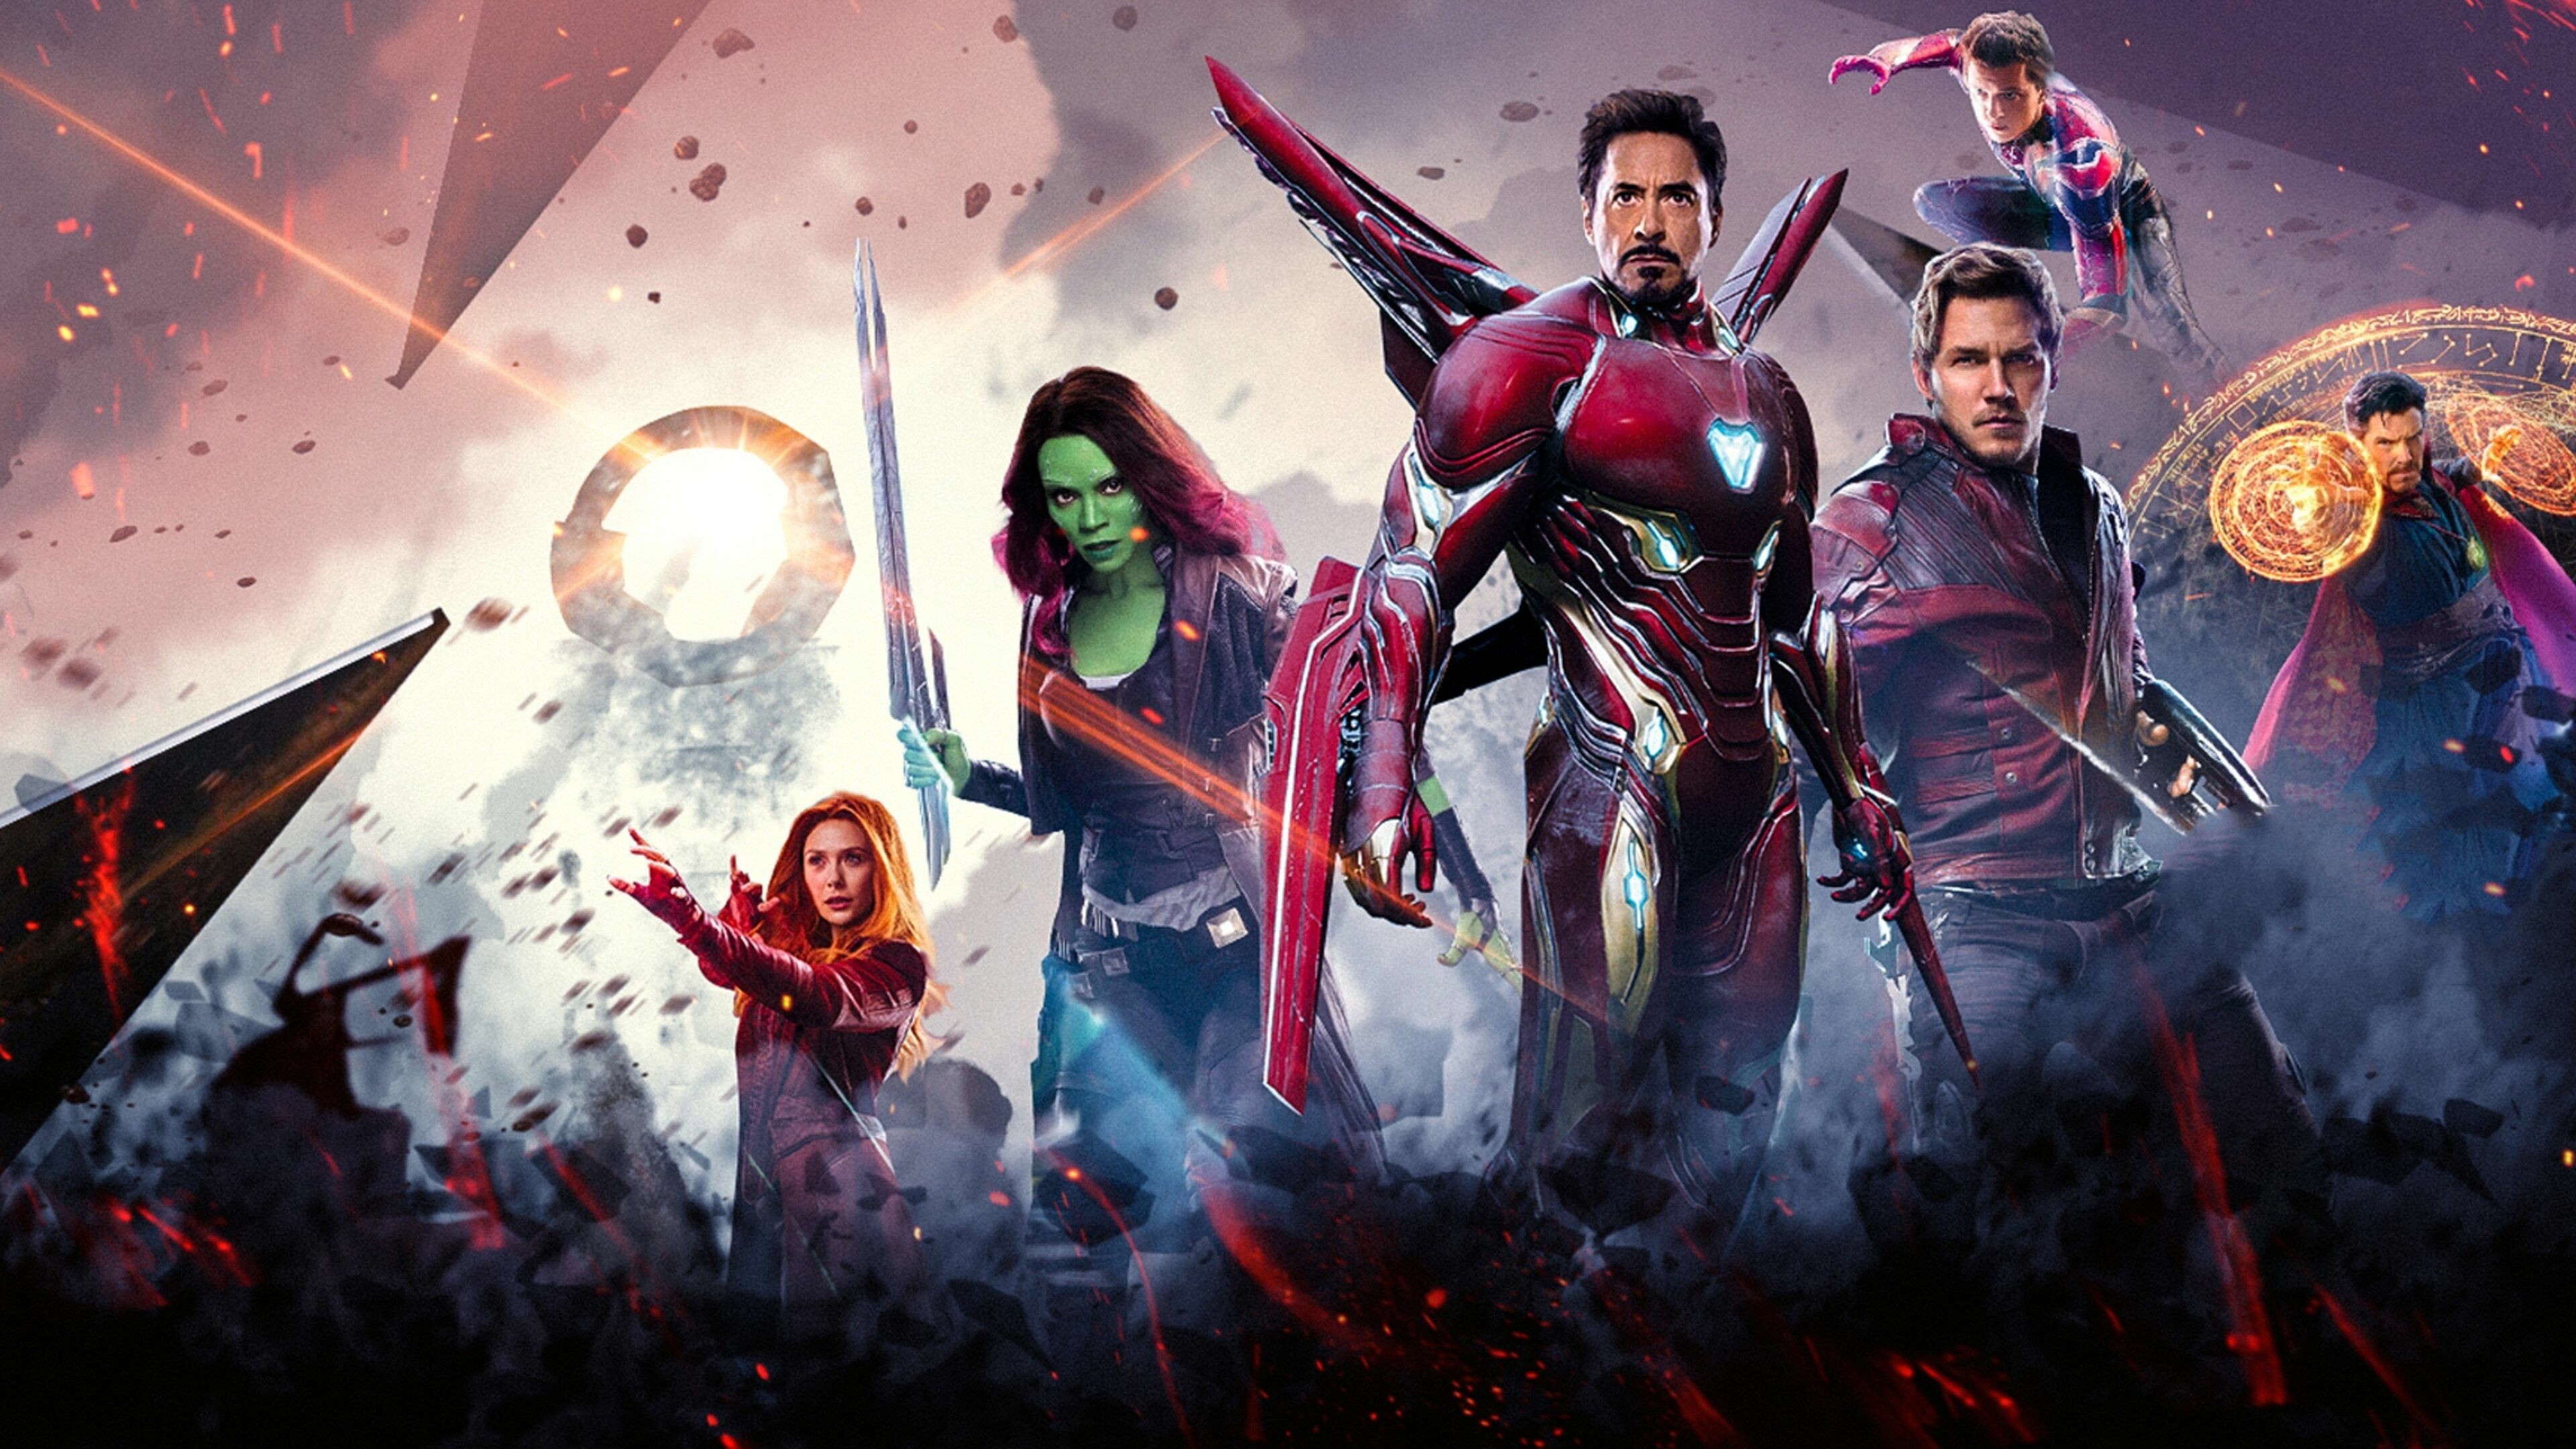 Avengers: Arranged as an ensemble of core MCU characters such as Iron Man, Captain America and Thor, they are central to the MCU's Infinity Saga and have been acclaimed as an important part of the franchise. 3840x2160 4K Background.